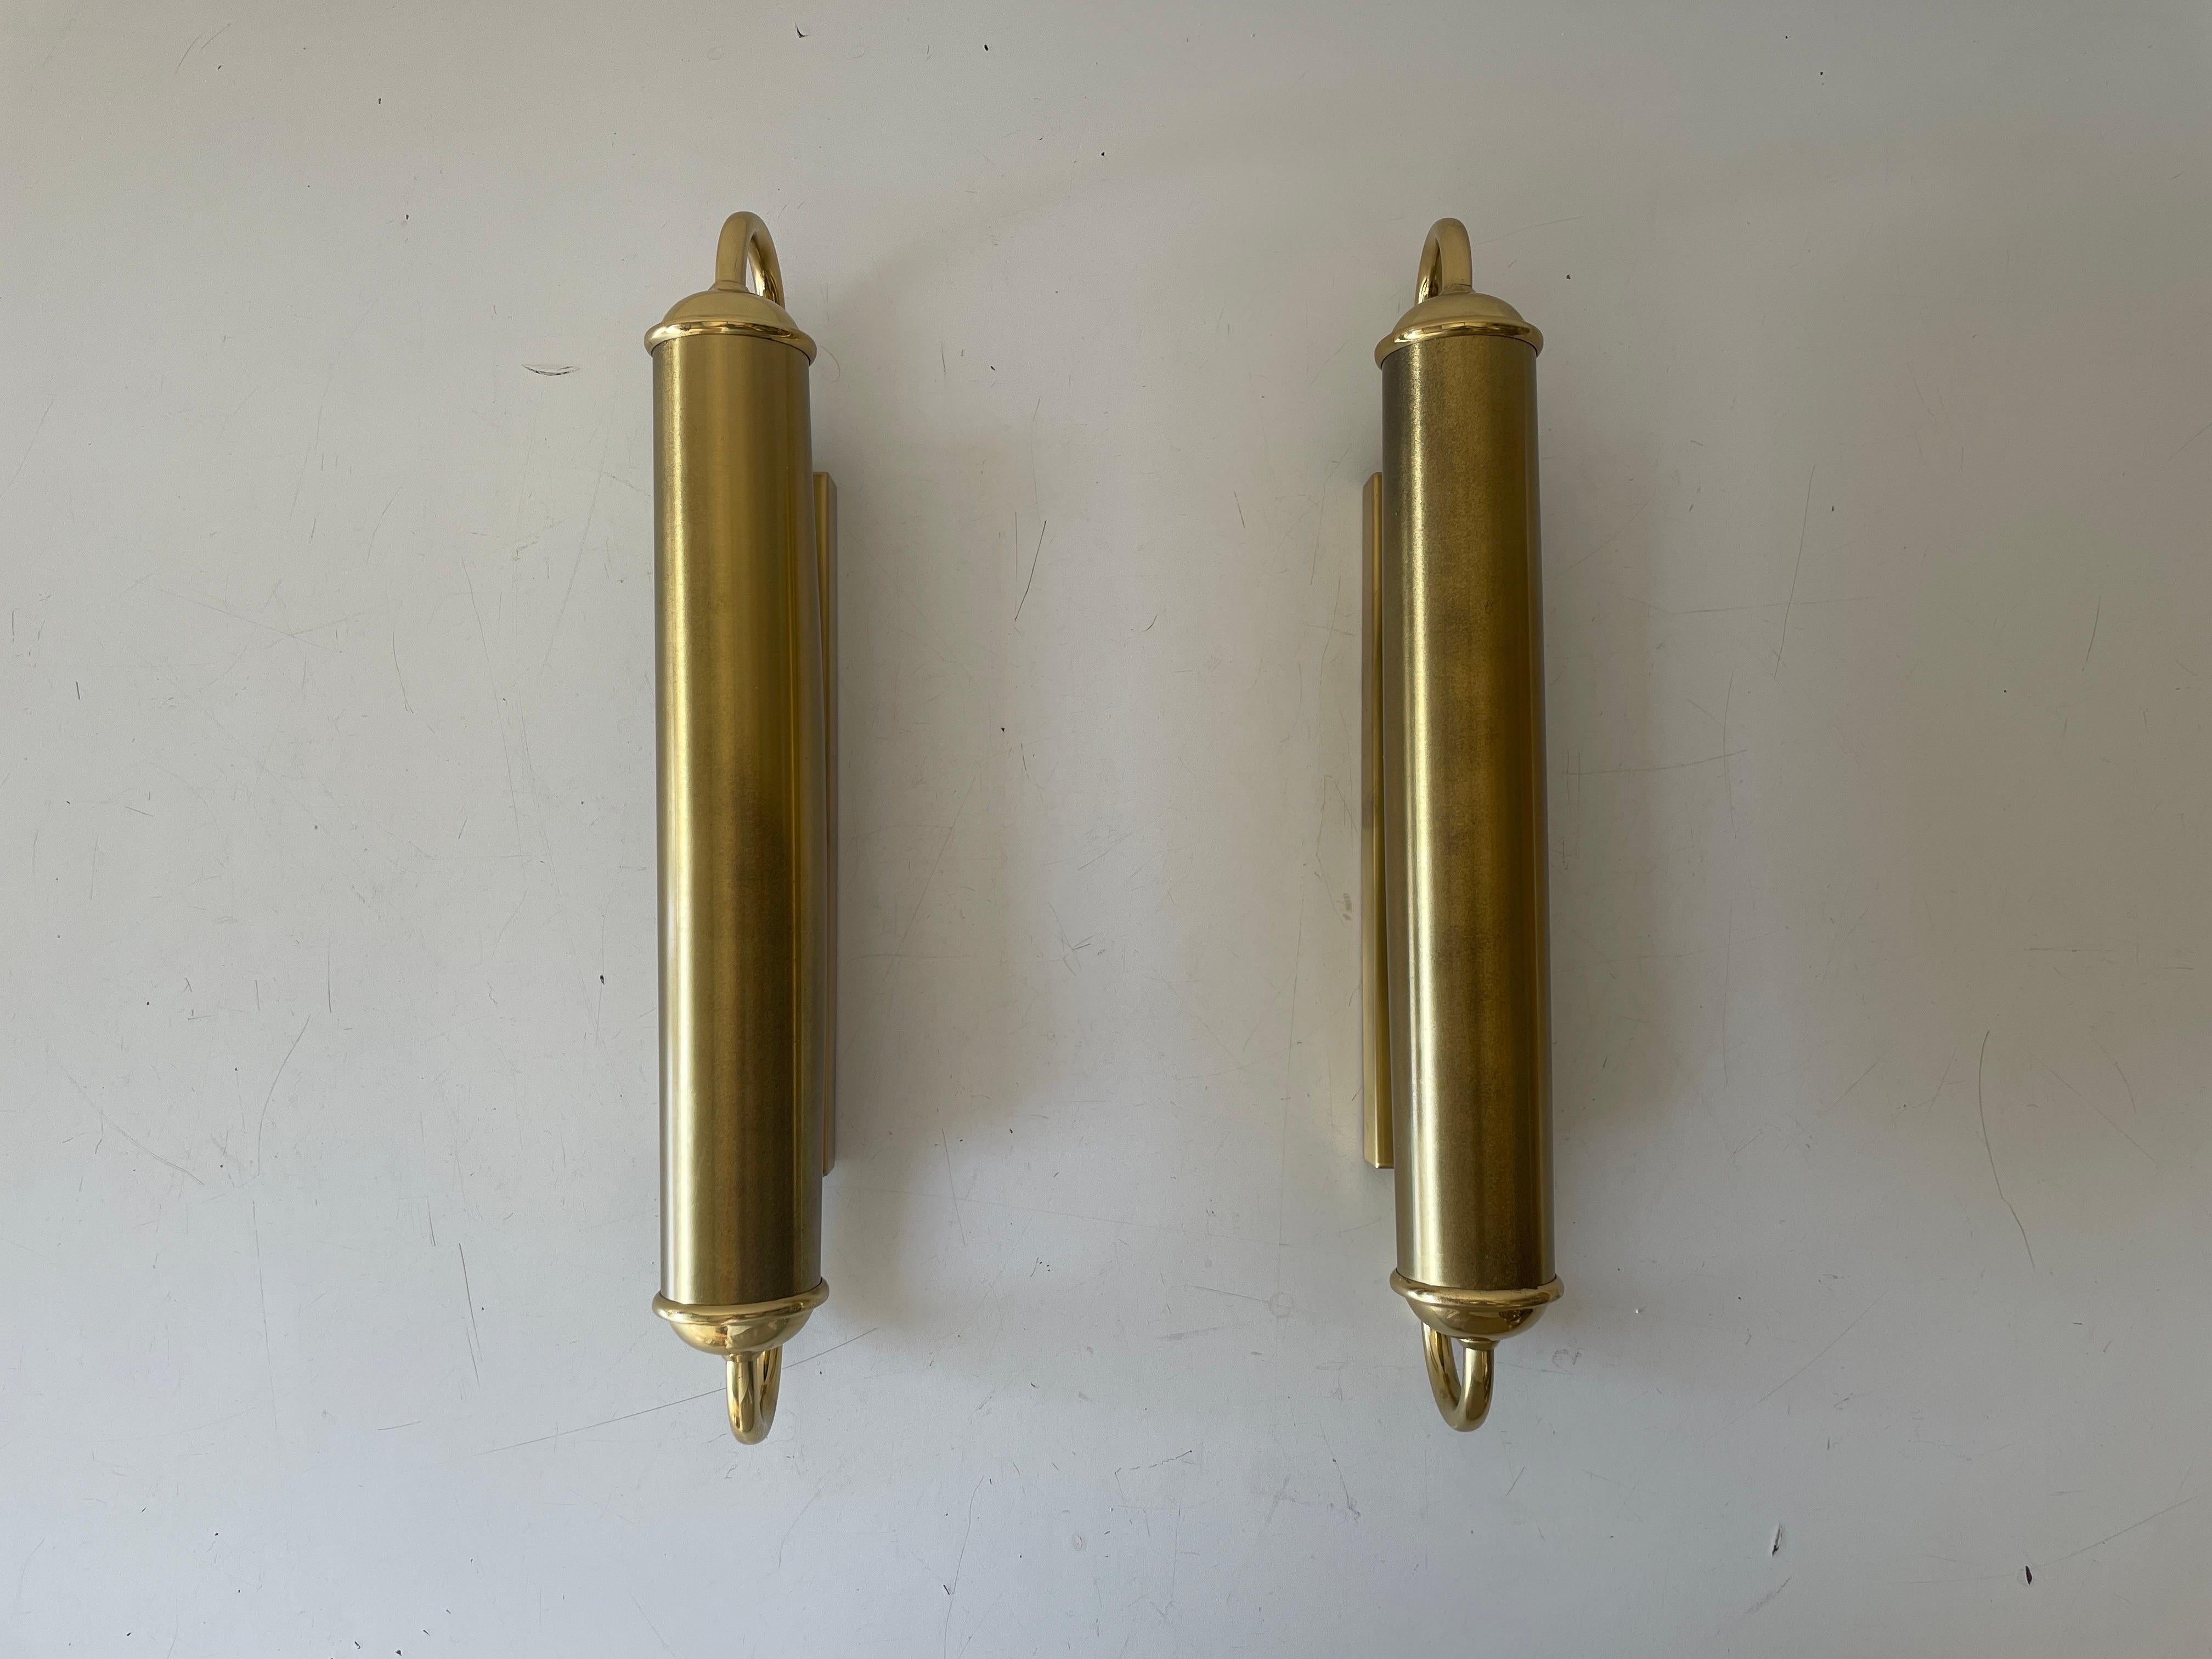 Cylindrical Design Art Deco Style Brass Pair of Sconces, 1960s, Germany

Very nice high quality wall lamps.

Lamps are in very good vintage condition.

These lamps works with 2x E14 standard light bulbs. 
Wired and suitable to use in all countries.